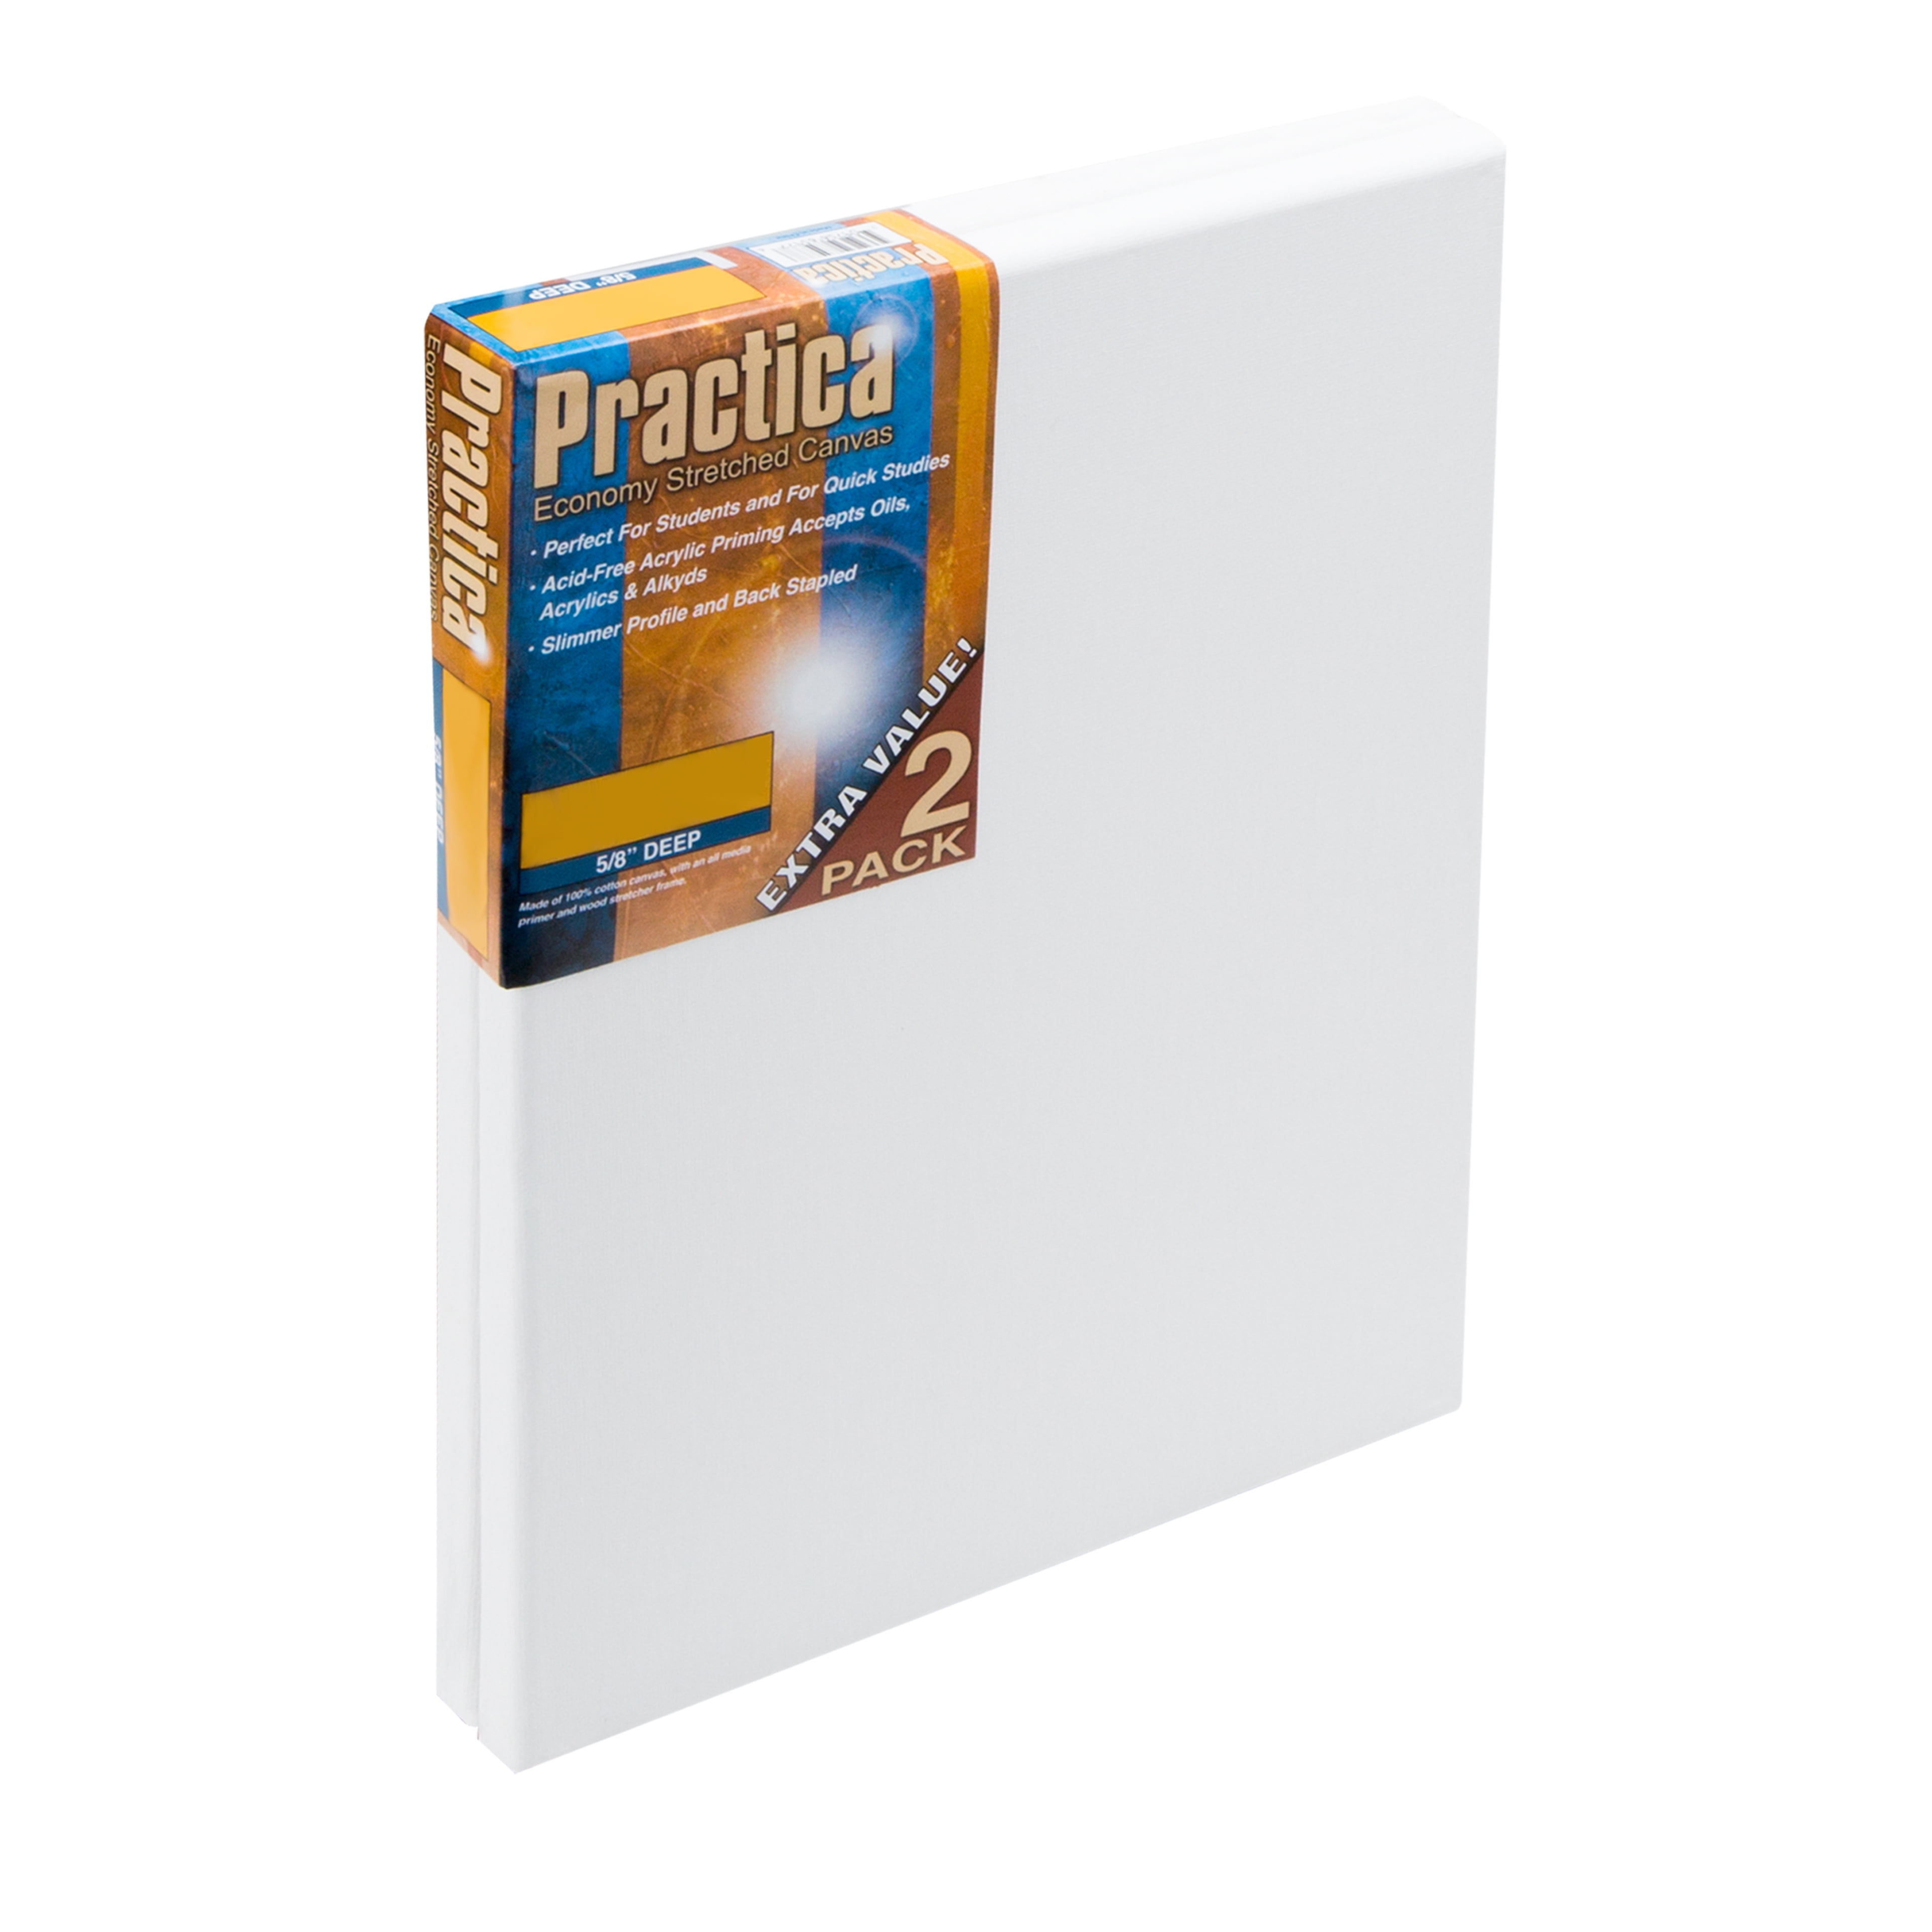 Creative Inspirations 3x3 Stretched Canvas Super Value 5 Packs - High  Quality, Low Cost Canvas, Cotton Duck, Acid Free, Archival, Accepts All  Paints